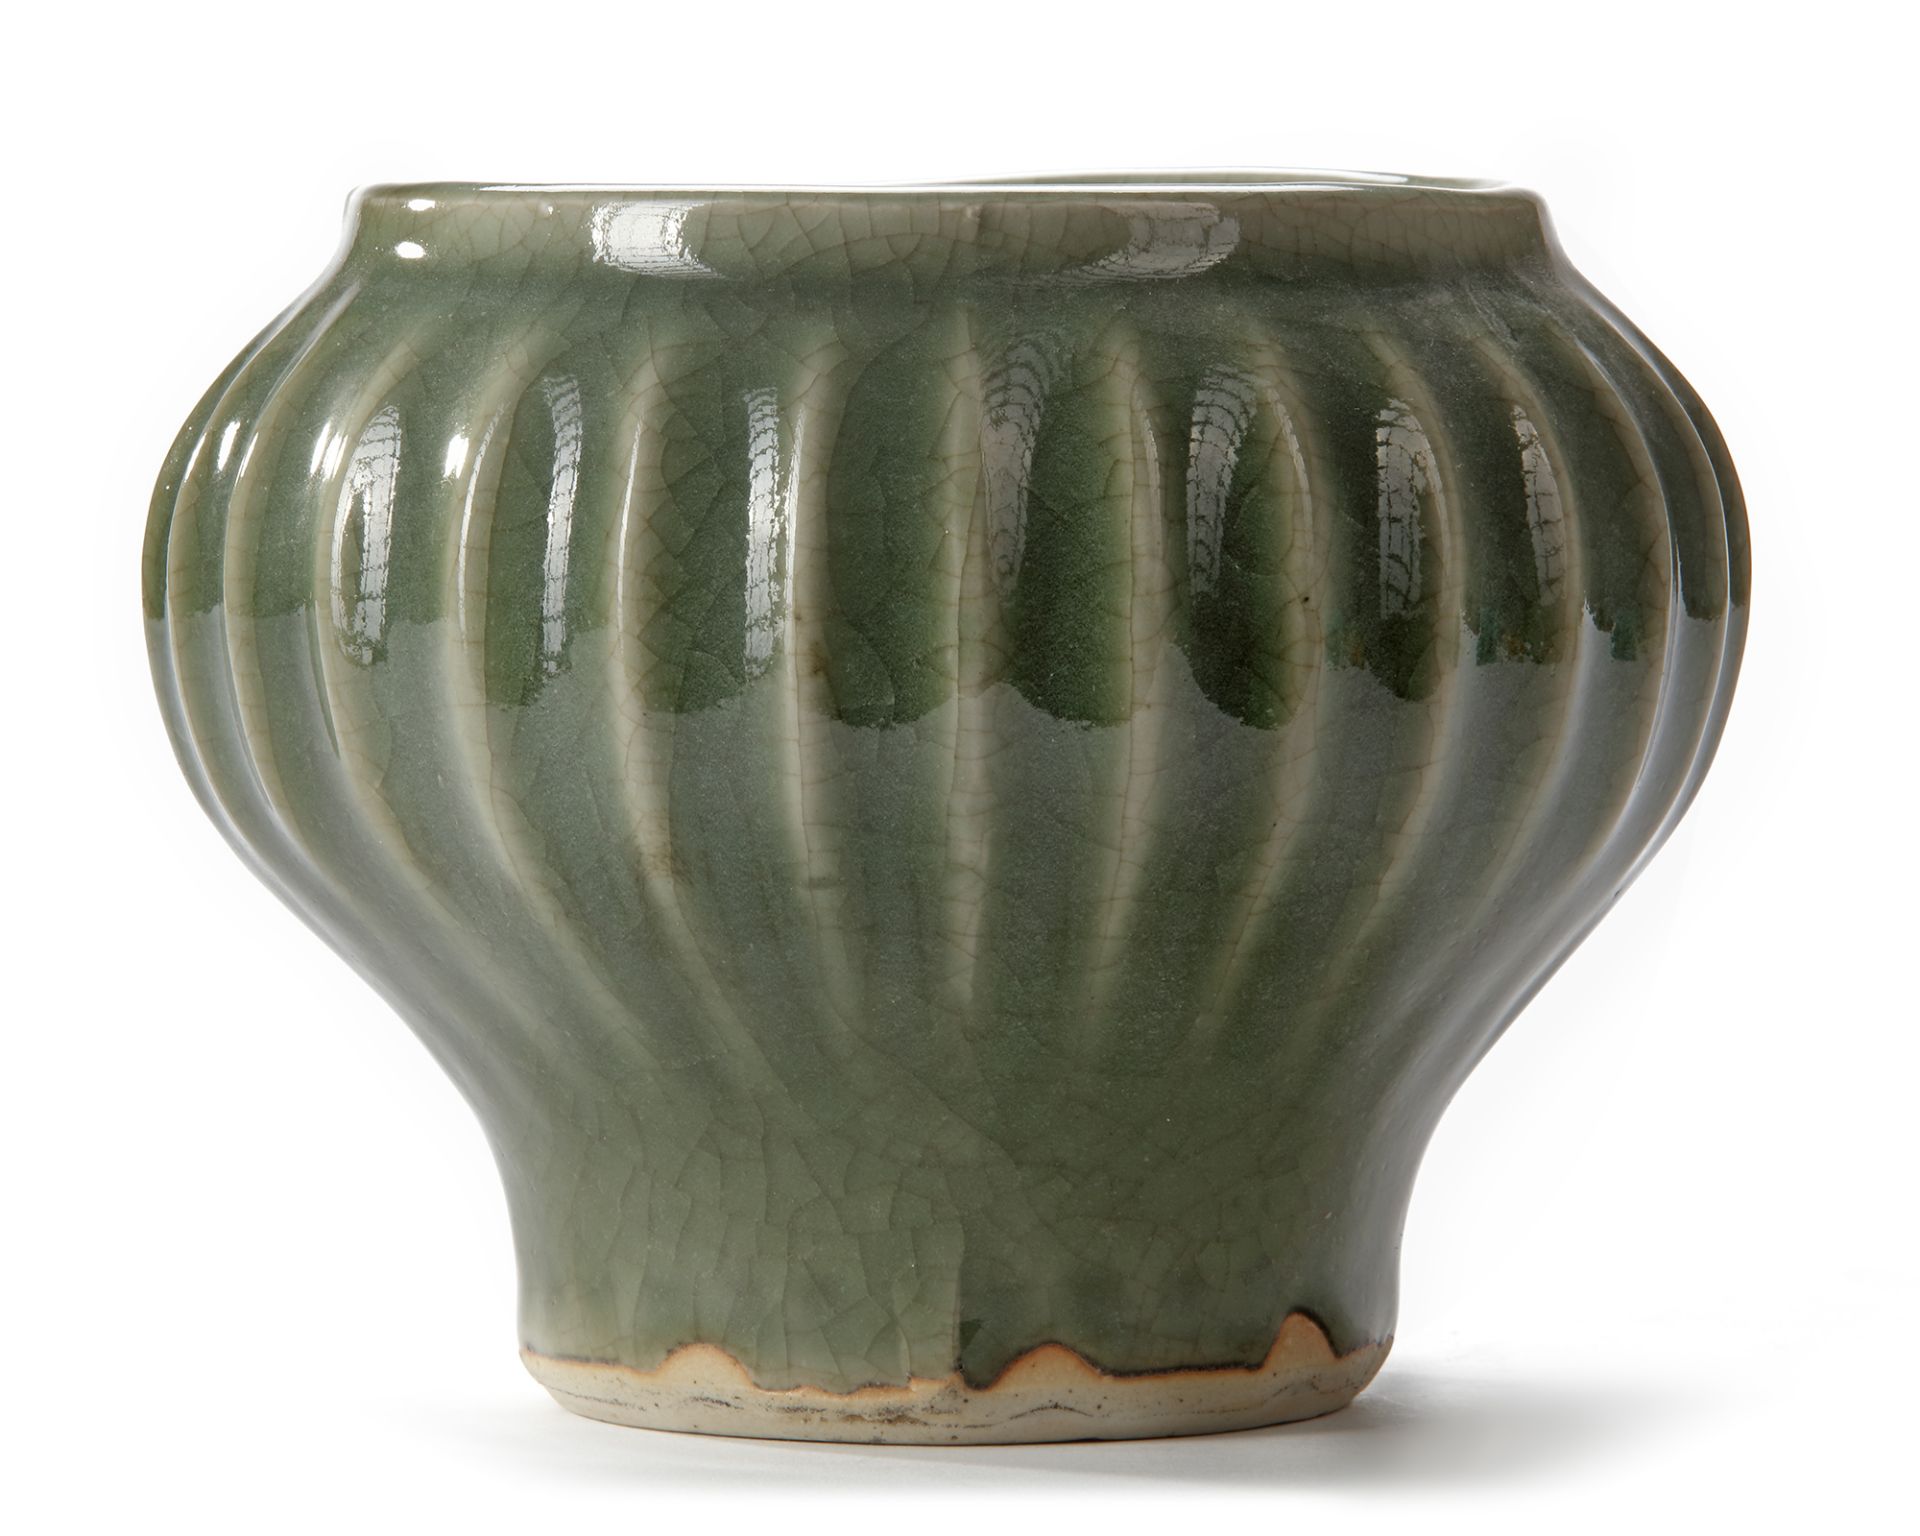 THREE CHINESE CELADON WARES, SONG DYNASTY (960-1127 AD) /MING DYNASTY (1368-1644) - Image 2 of 5